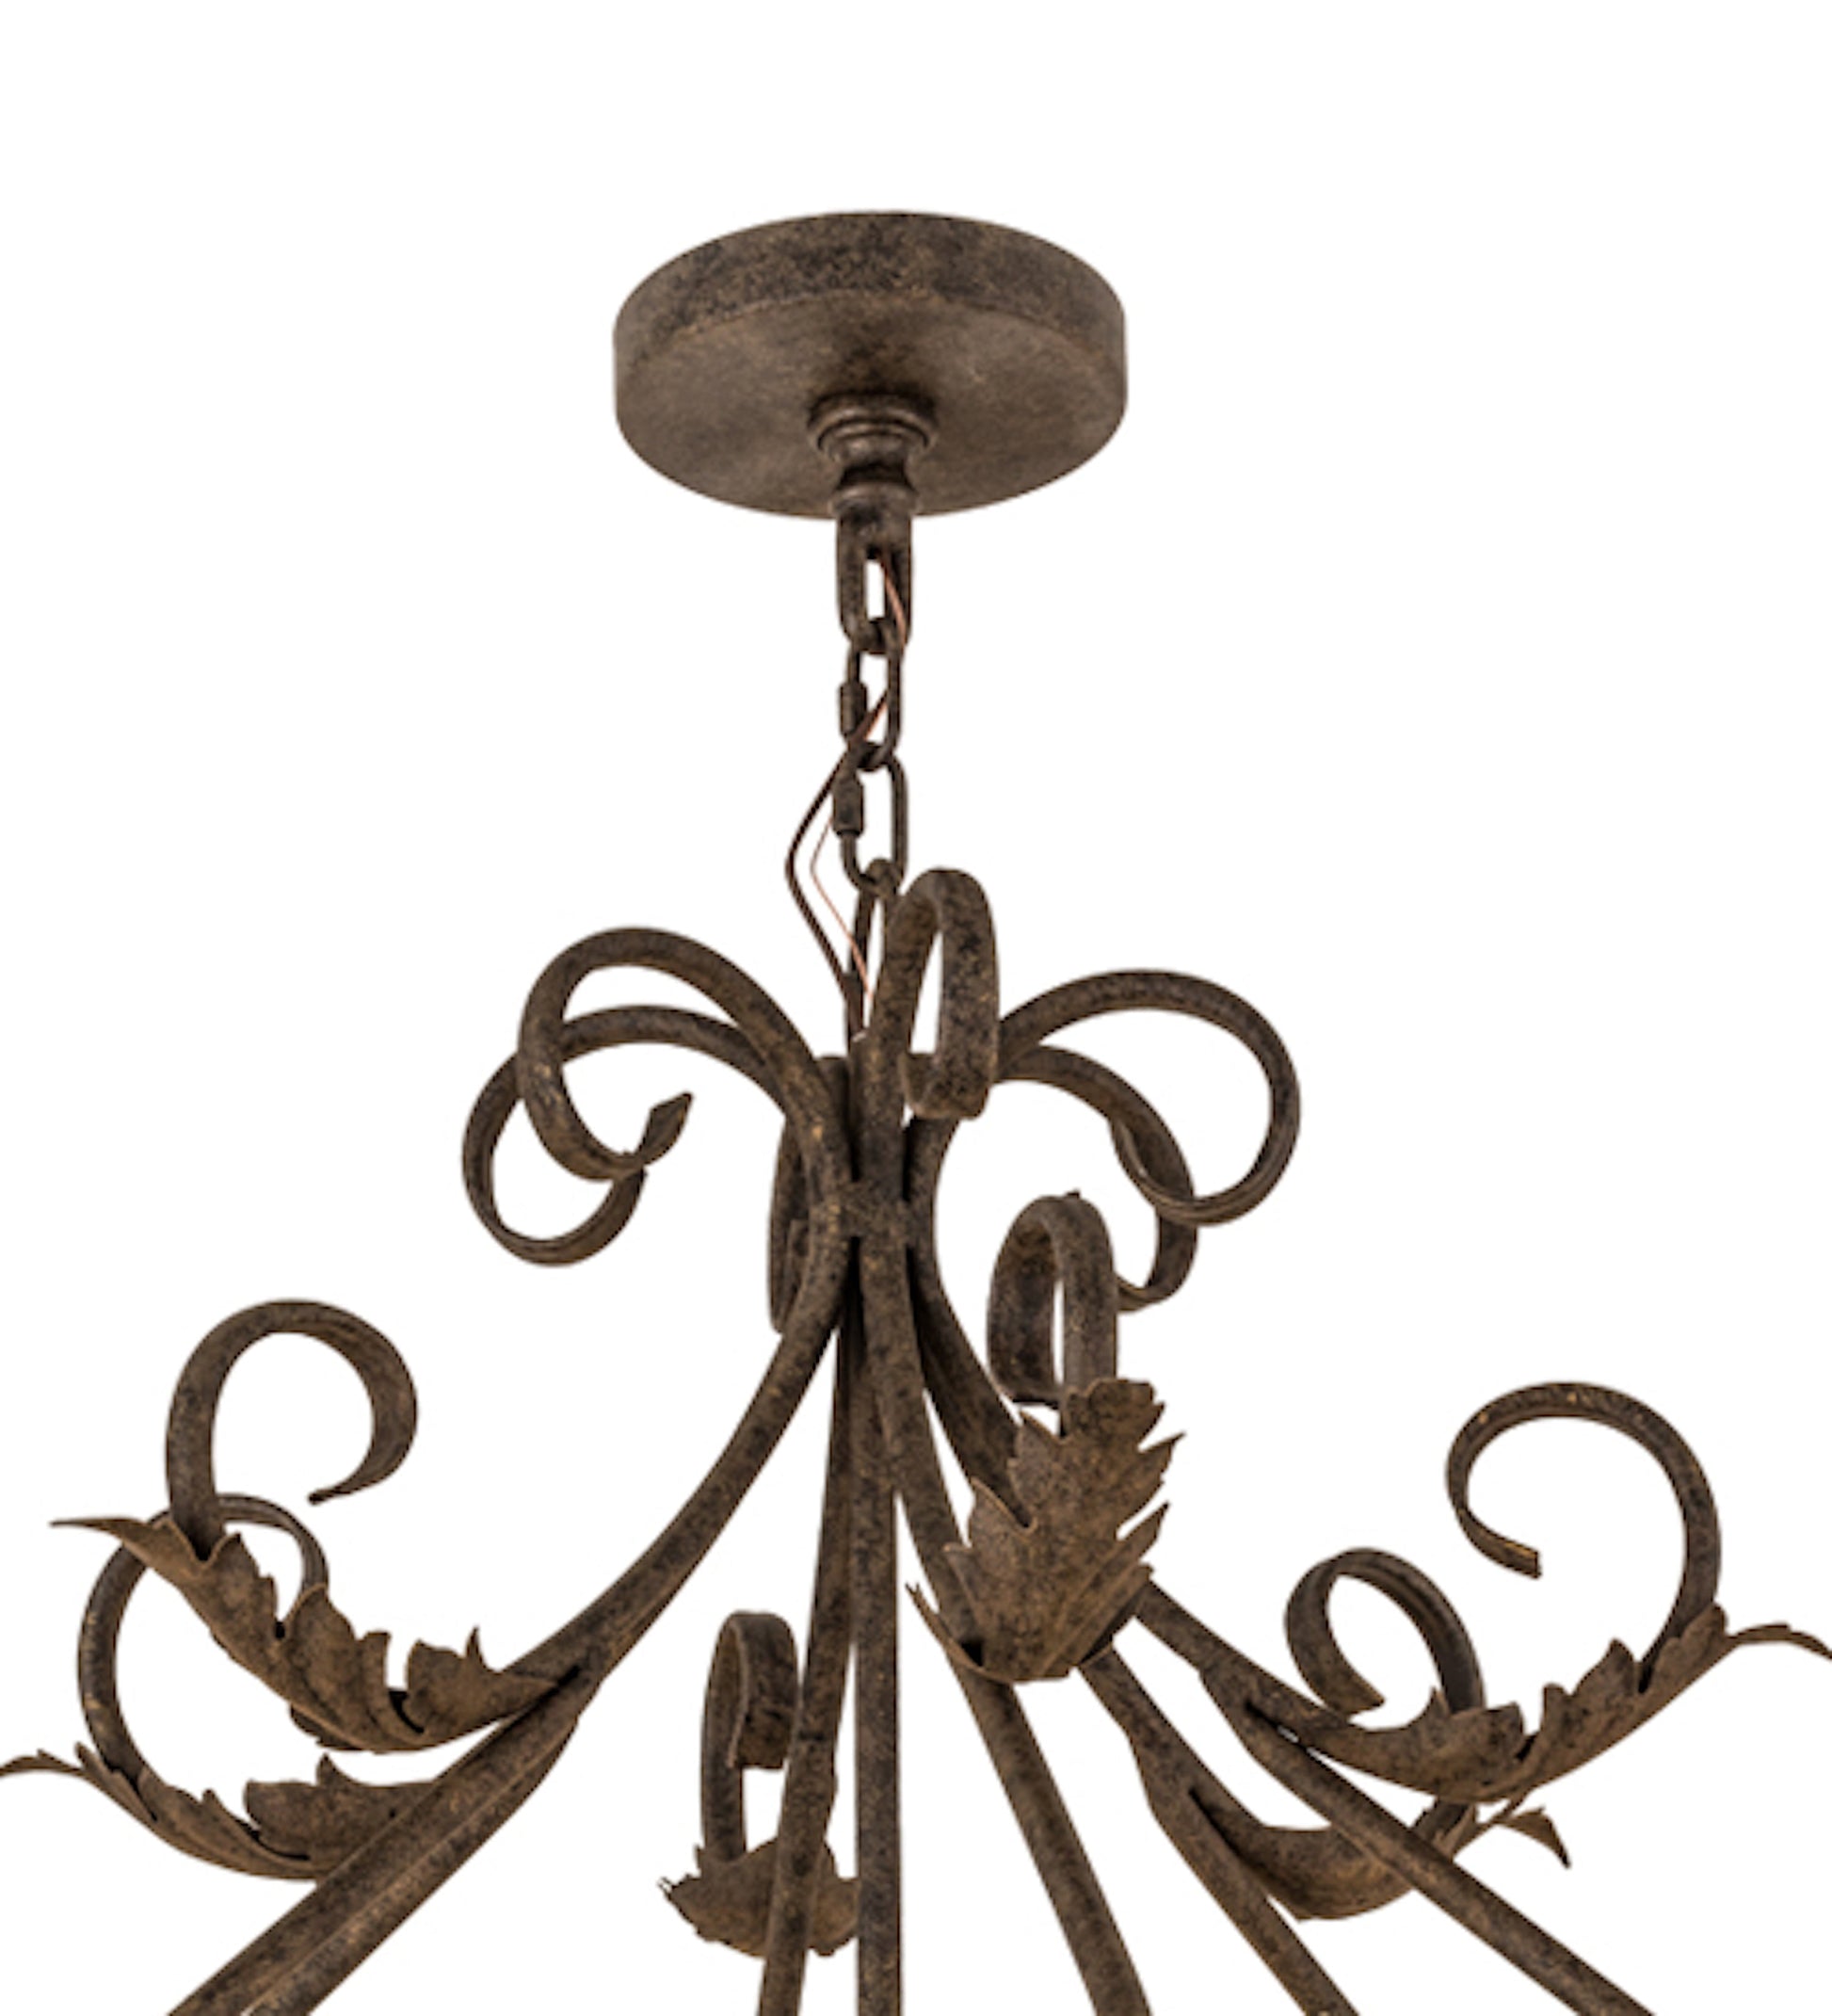 48" French Elegance 12-Light Chandelier by 2nd Ave Lighting